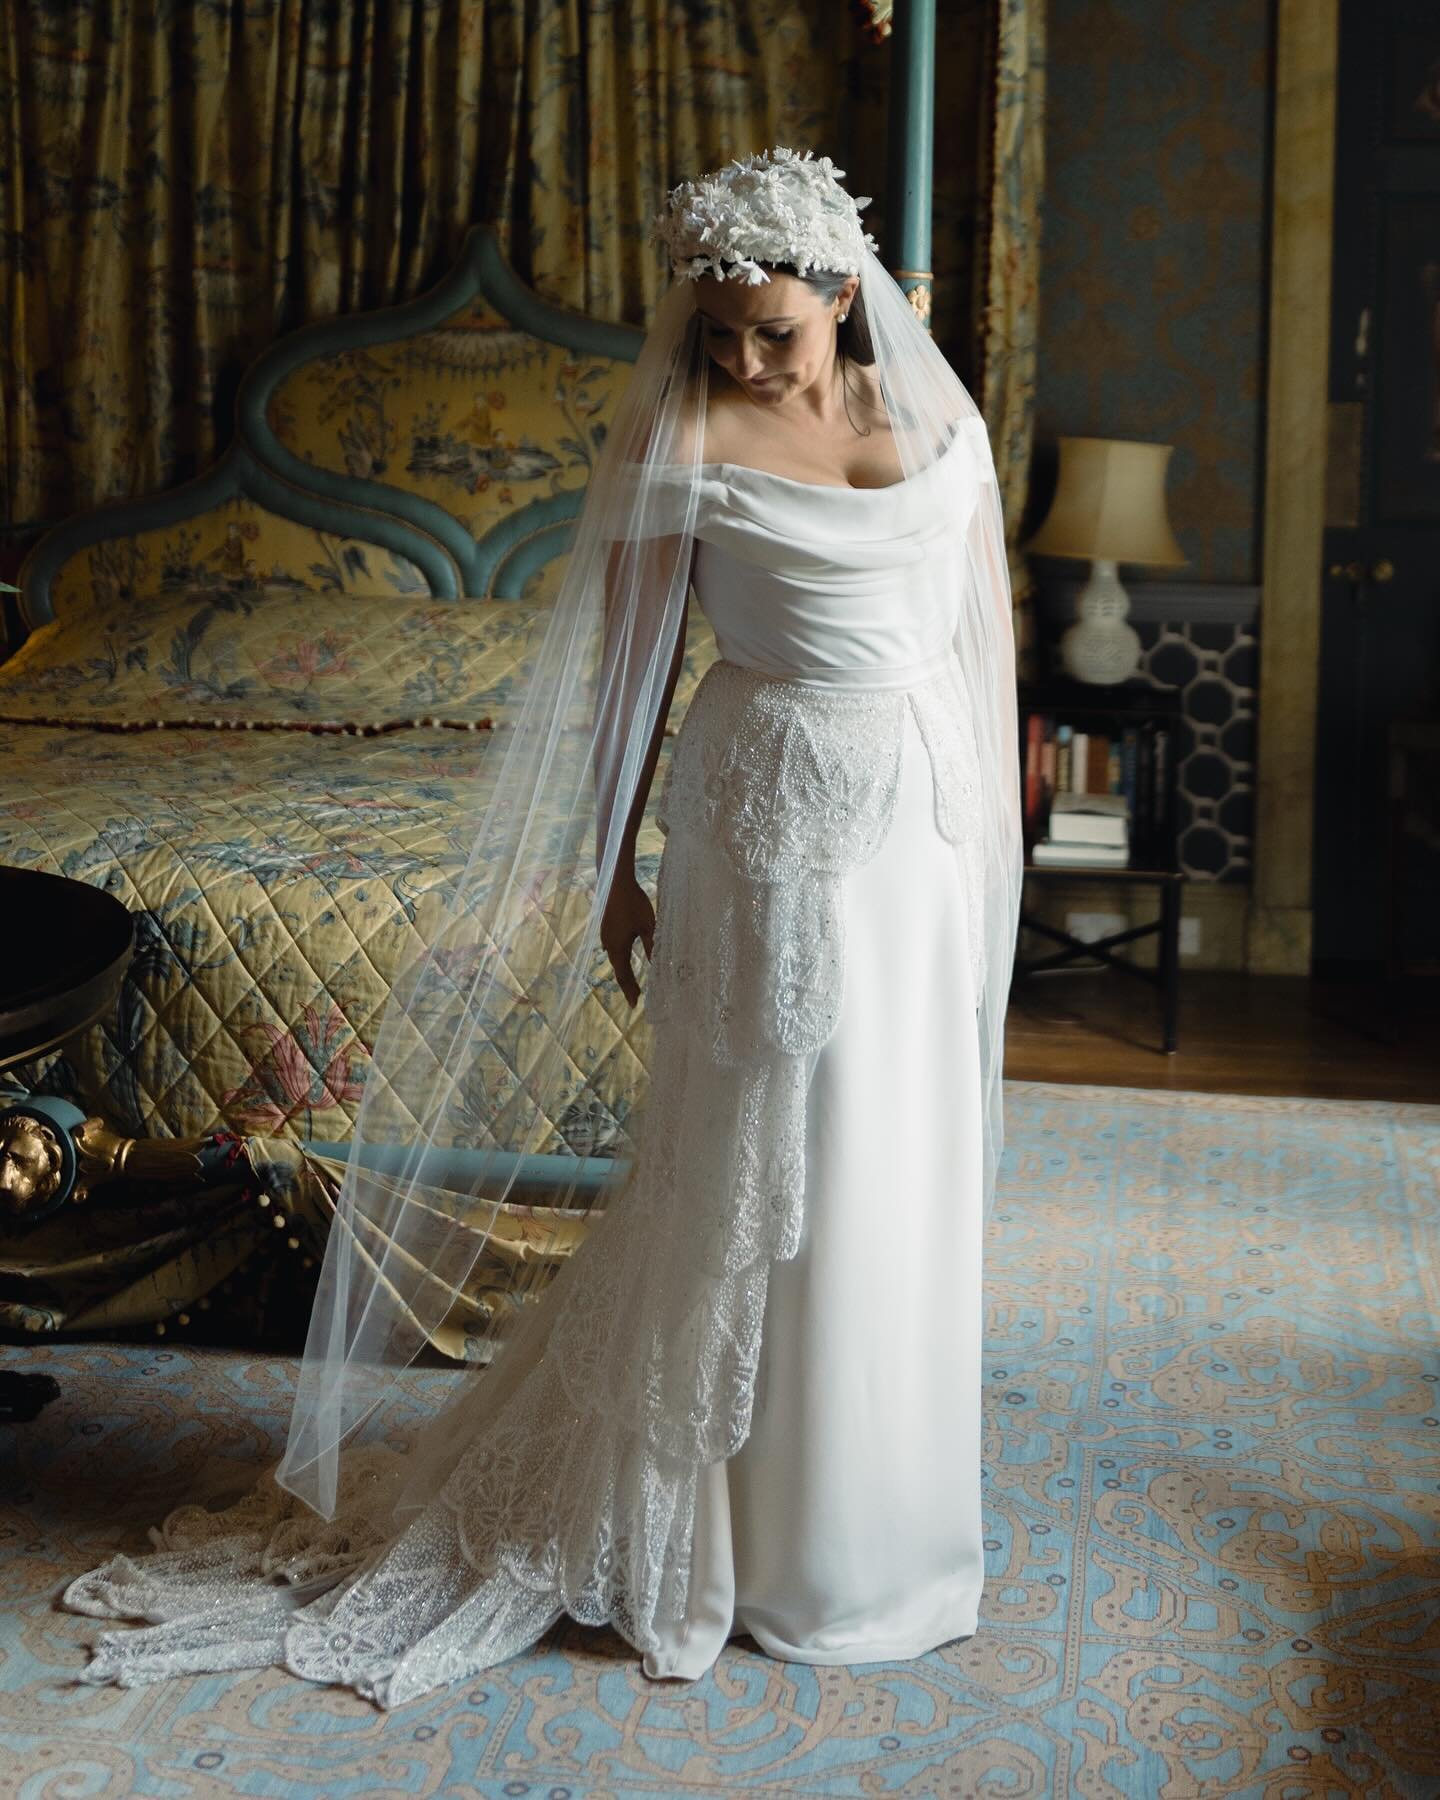 &ldquo;I feel we don&rsquo;t always see the stories of mother&rsquo;s trying to find their place in the bridal world and I loved that Halfpenny not only accommodated all bodies but really championed this. (I also really needed to be able to drive my 